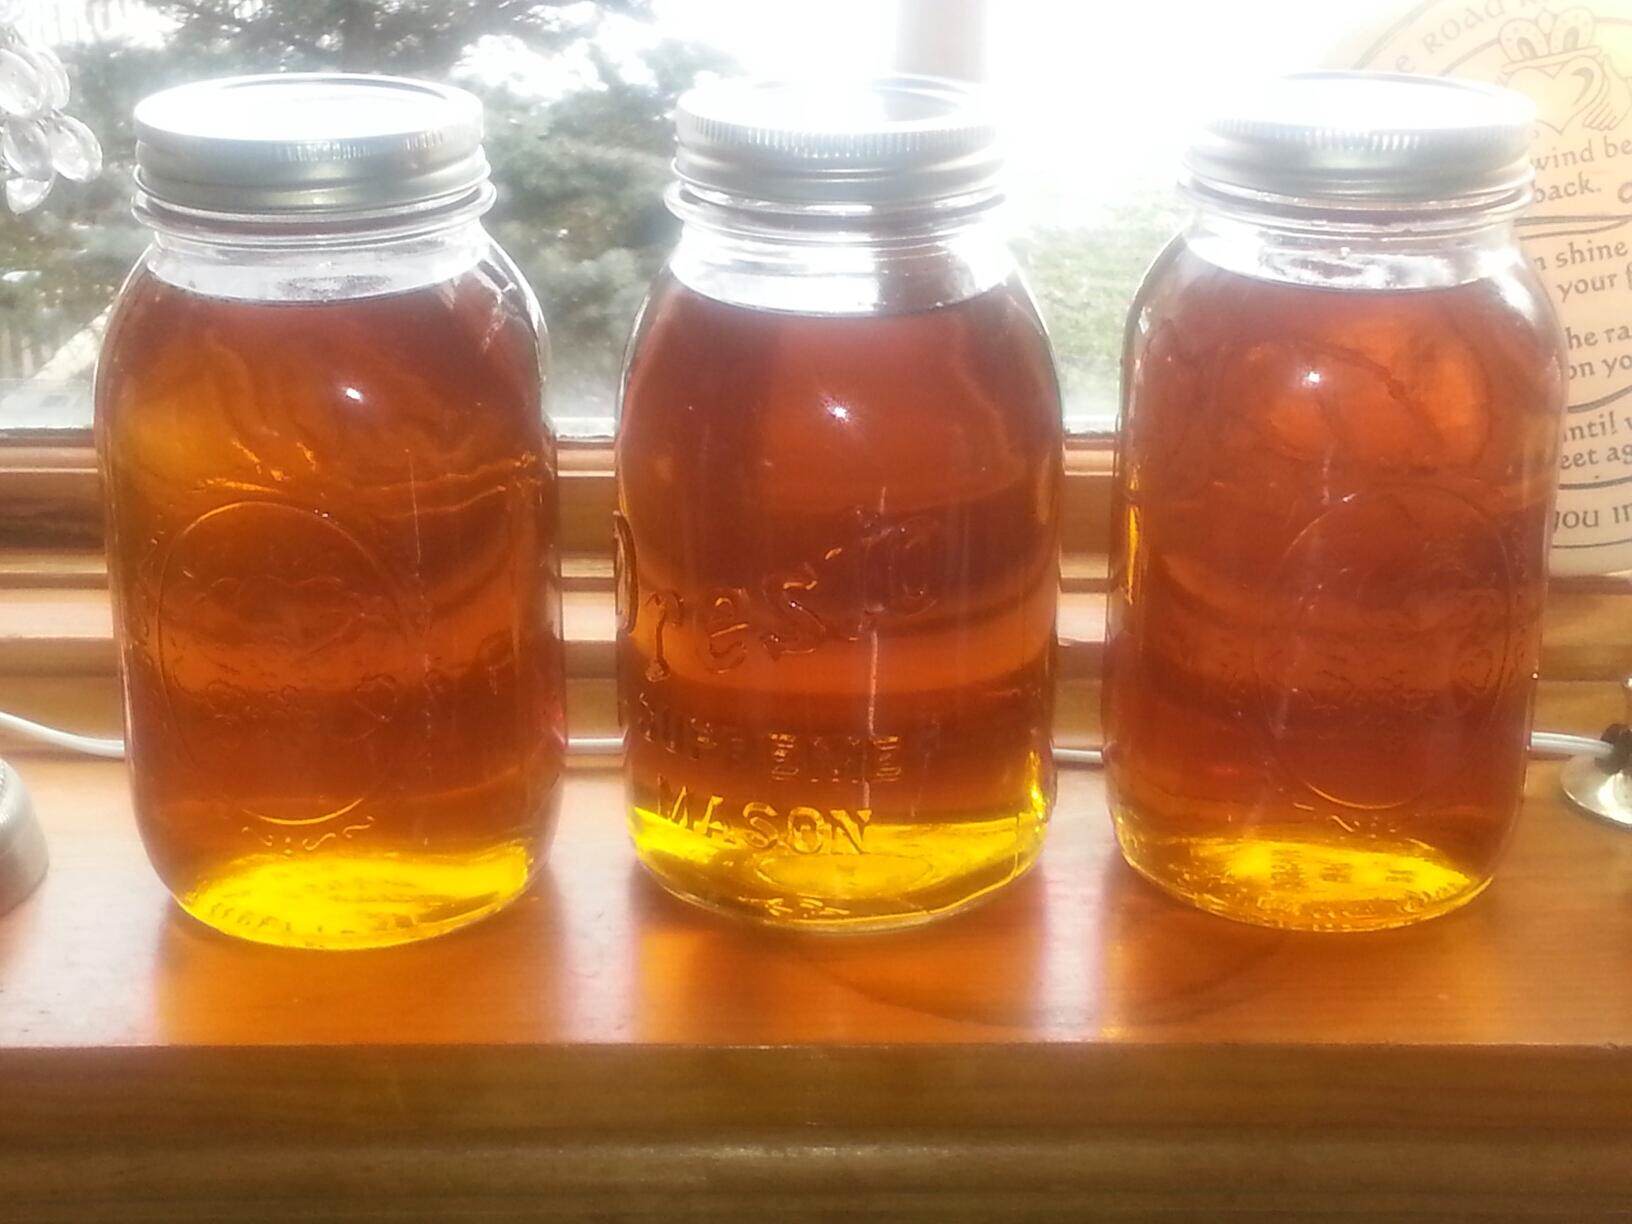 First run Ohio maple syrup